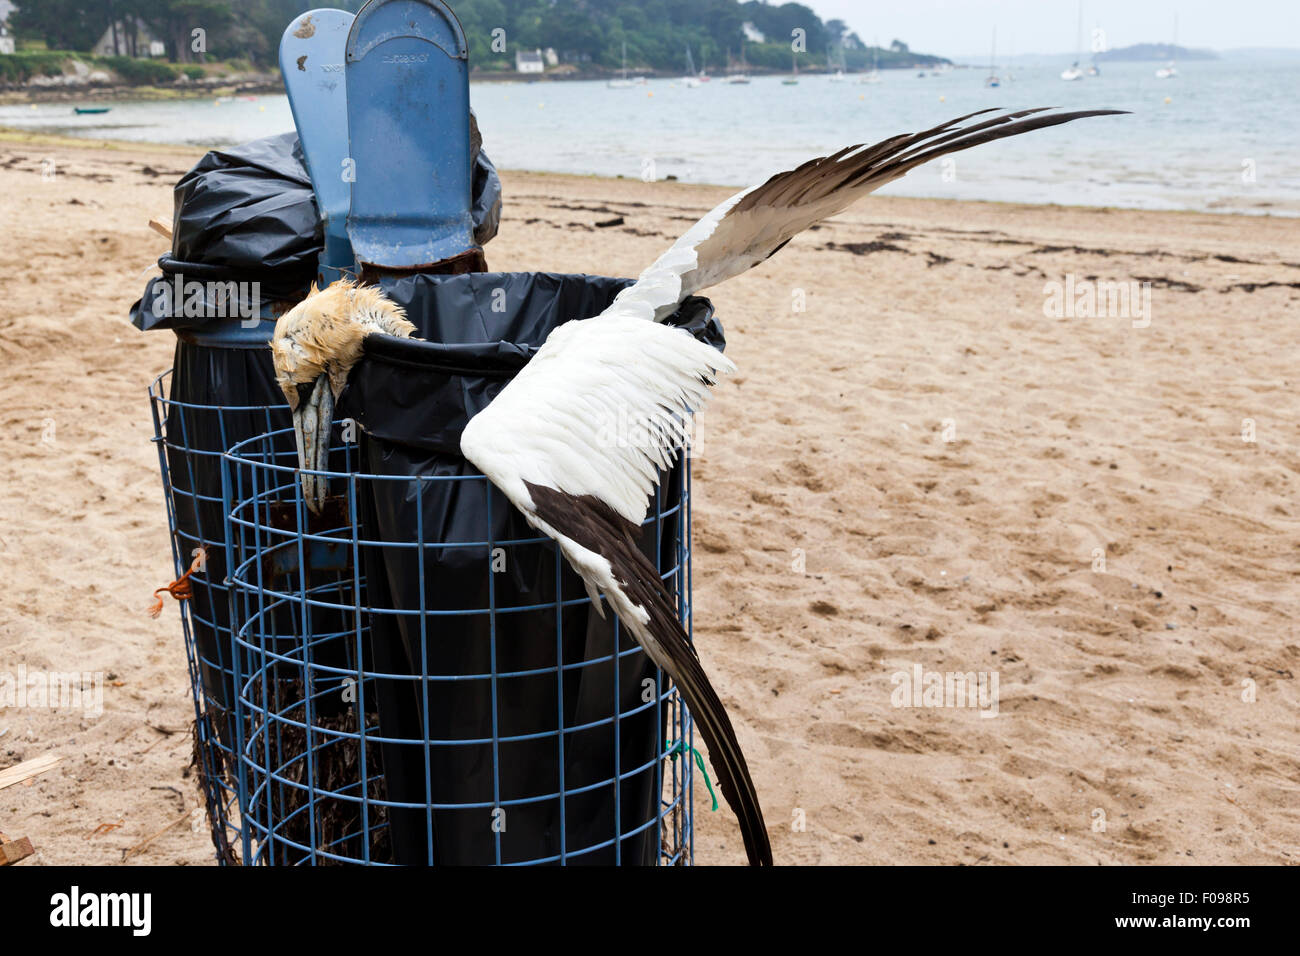 A dead gannet in a litter bin on the beach at Le Lerio, Ile aux Moines, Gulf of Morbihan, Brittany, France Stock Photo